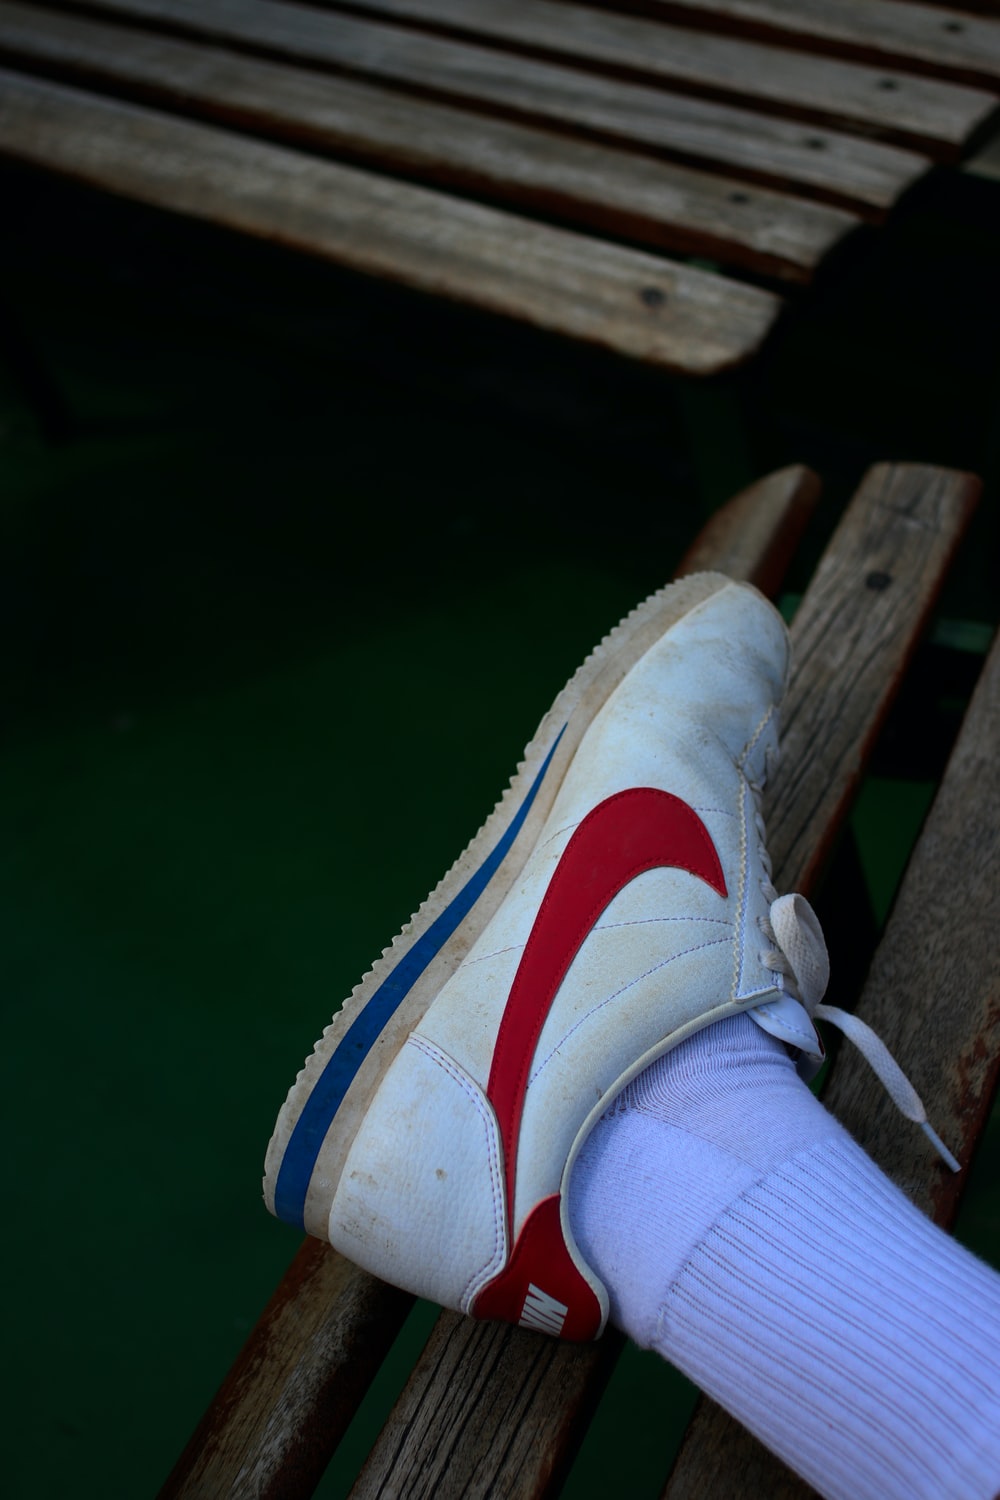 Nike Cortez Picture. Download Free Image